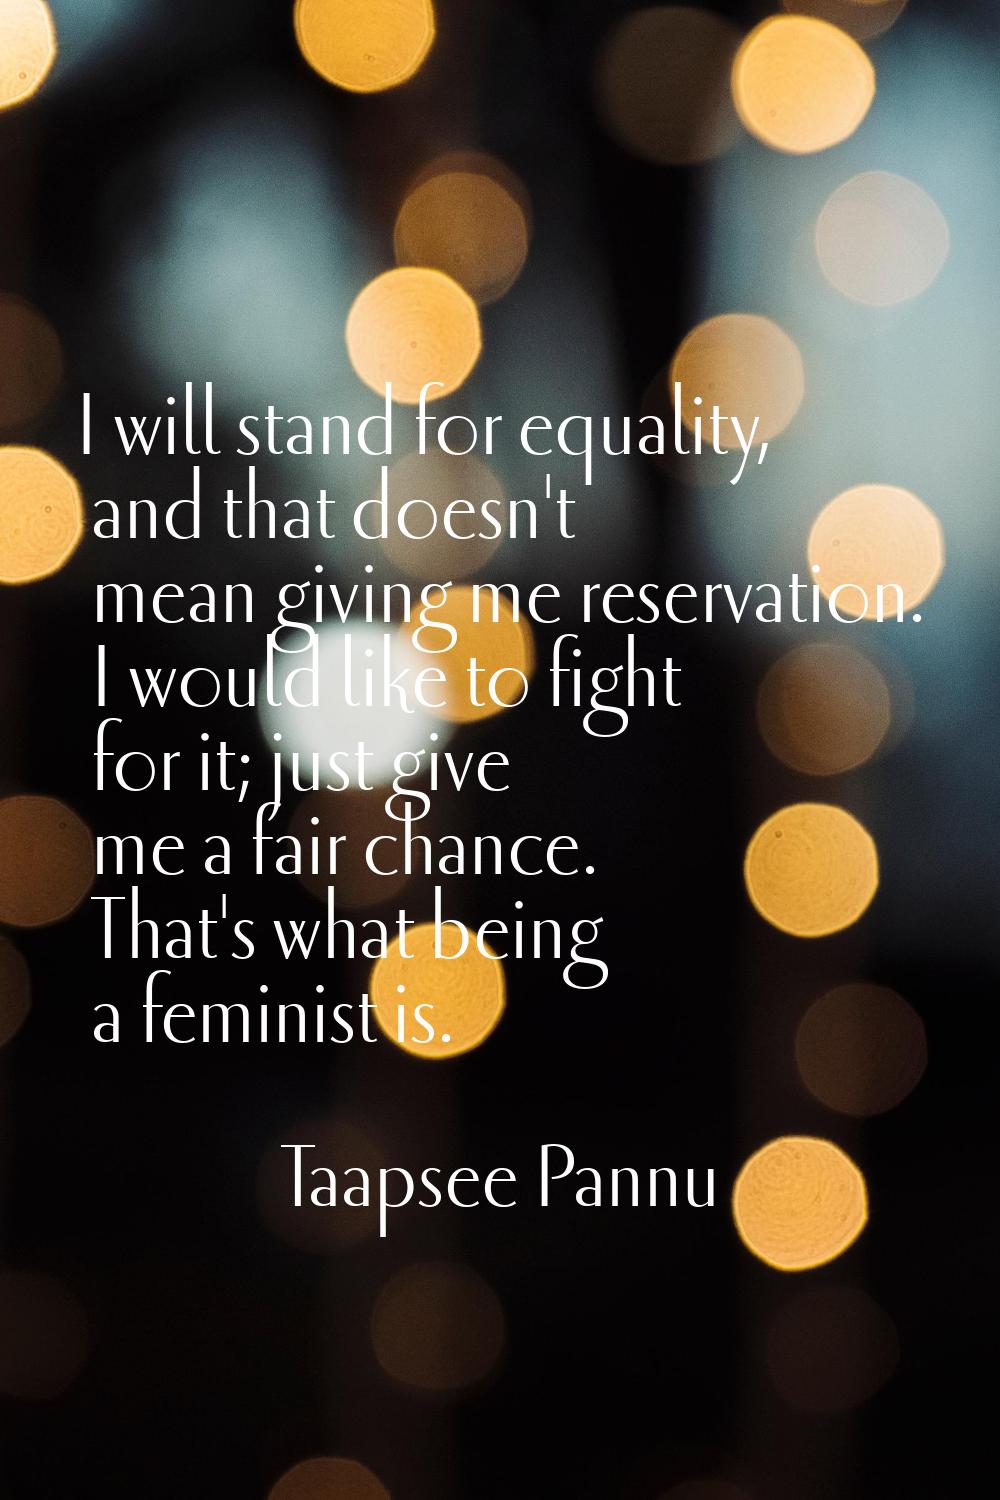 I will stand for equality, and that doesn't mean giving me reservation. I would like to fight for i